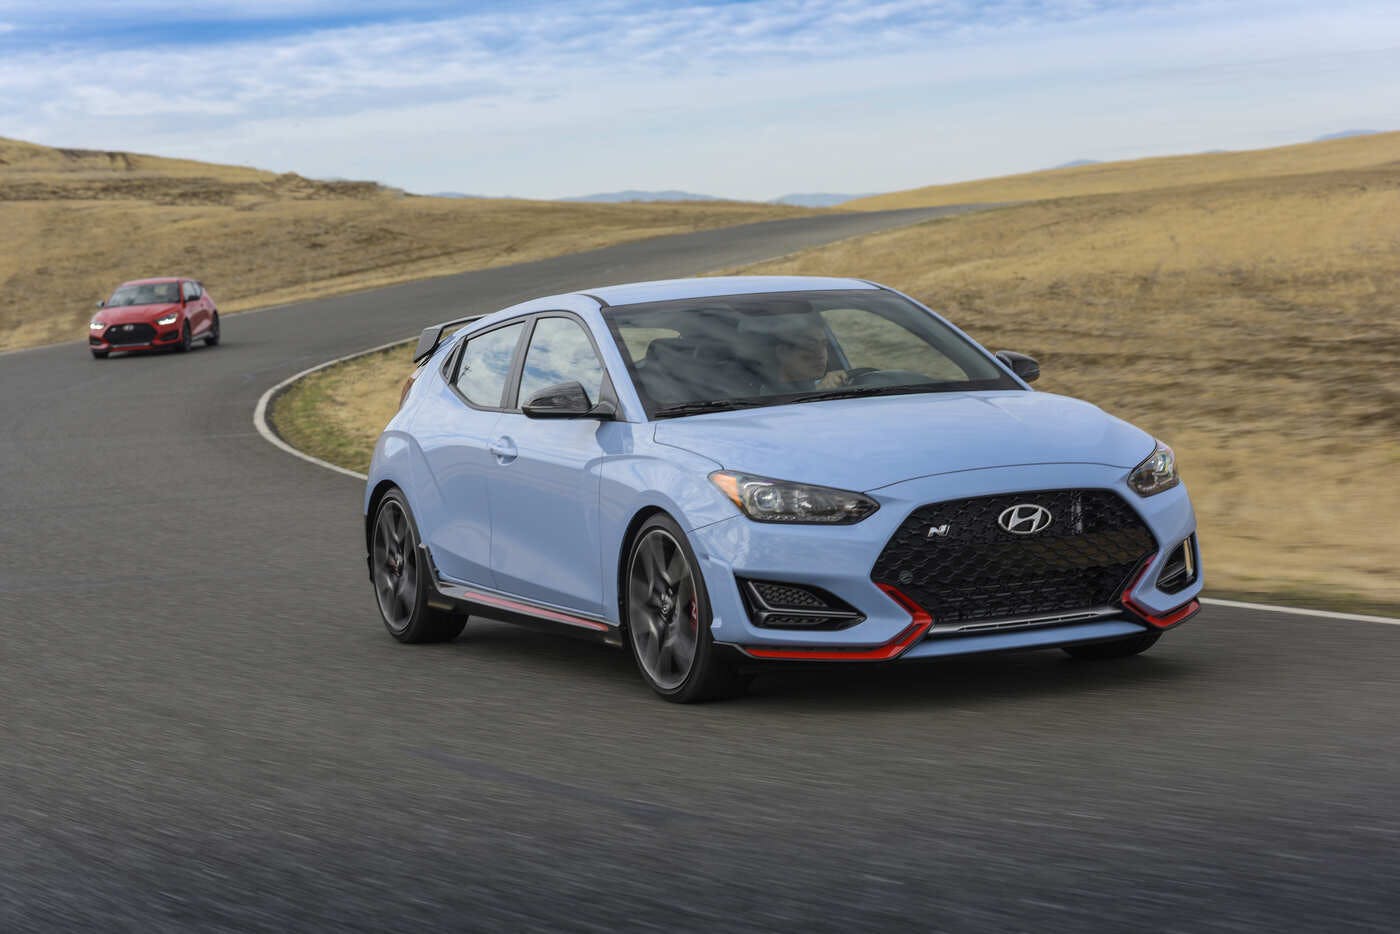 2020 Hyundai Veloster Comparisons Reviews Pictures Truecar